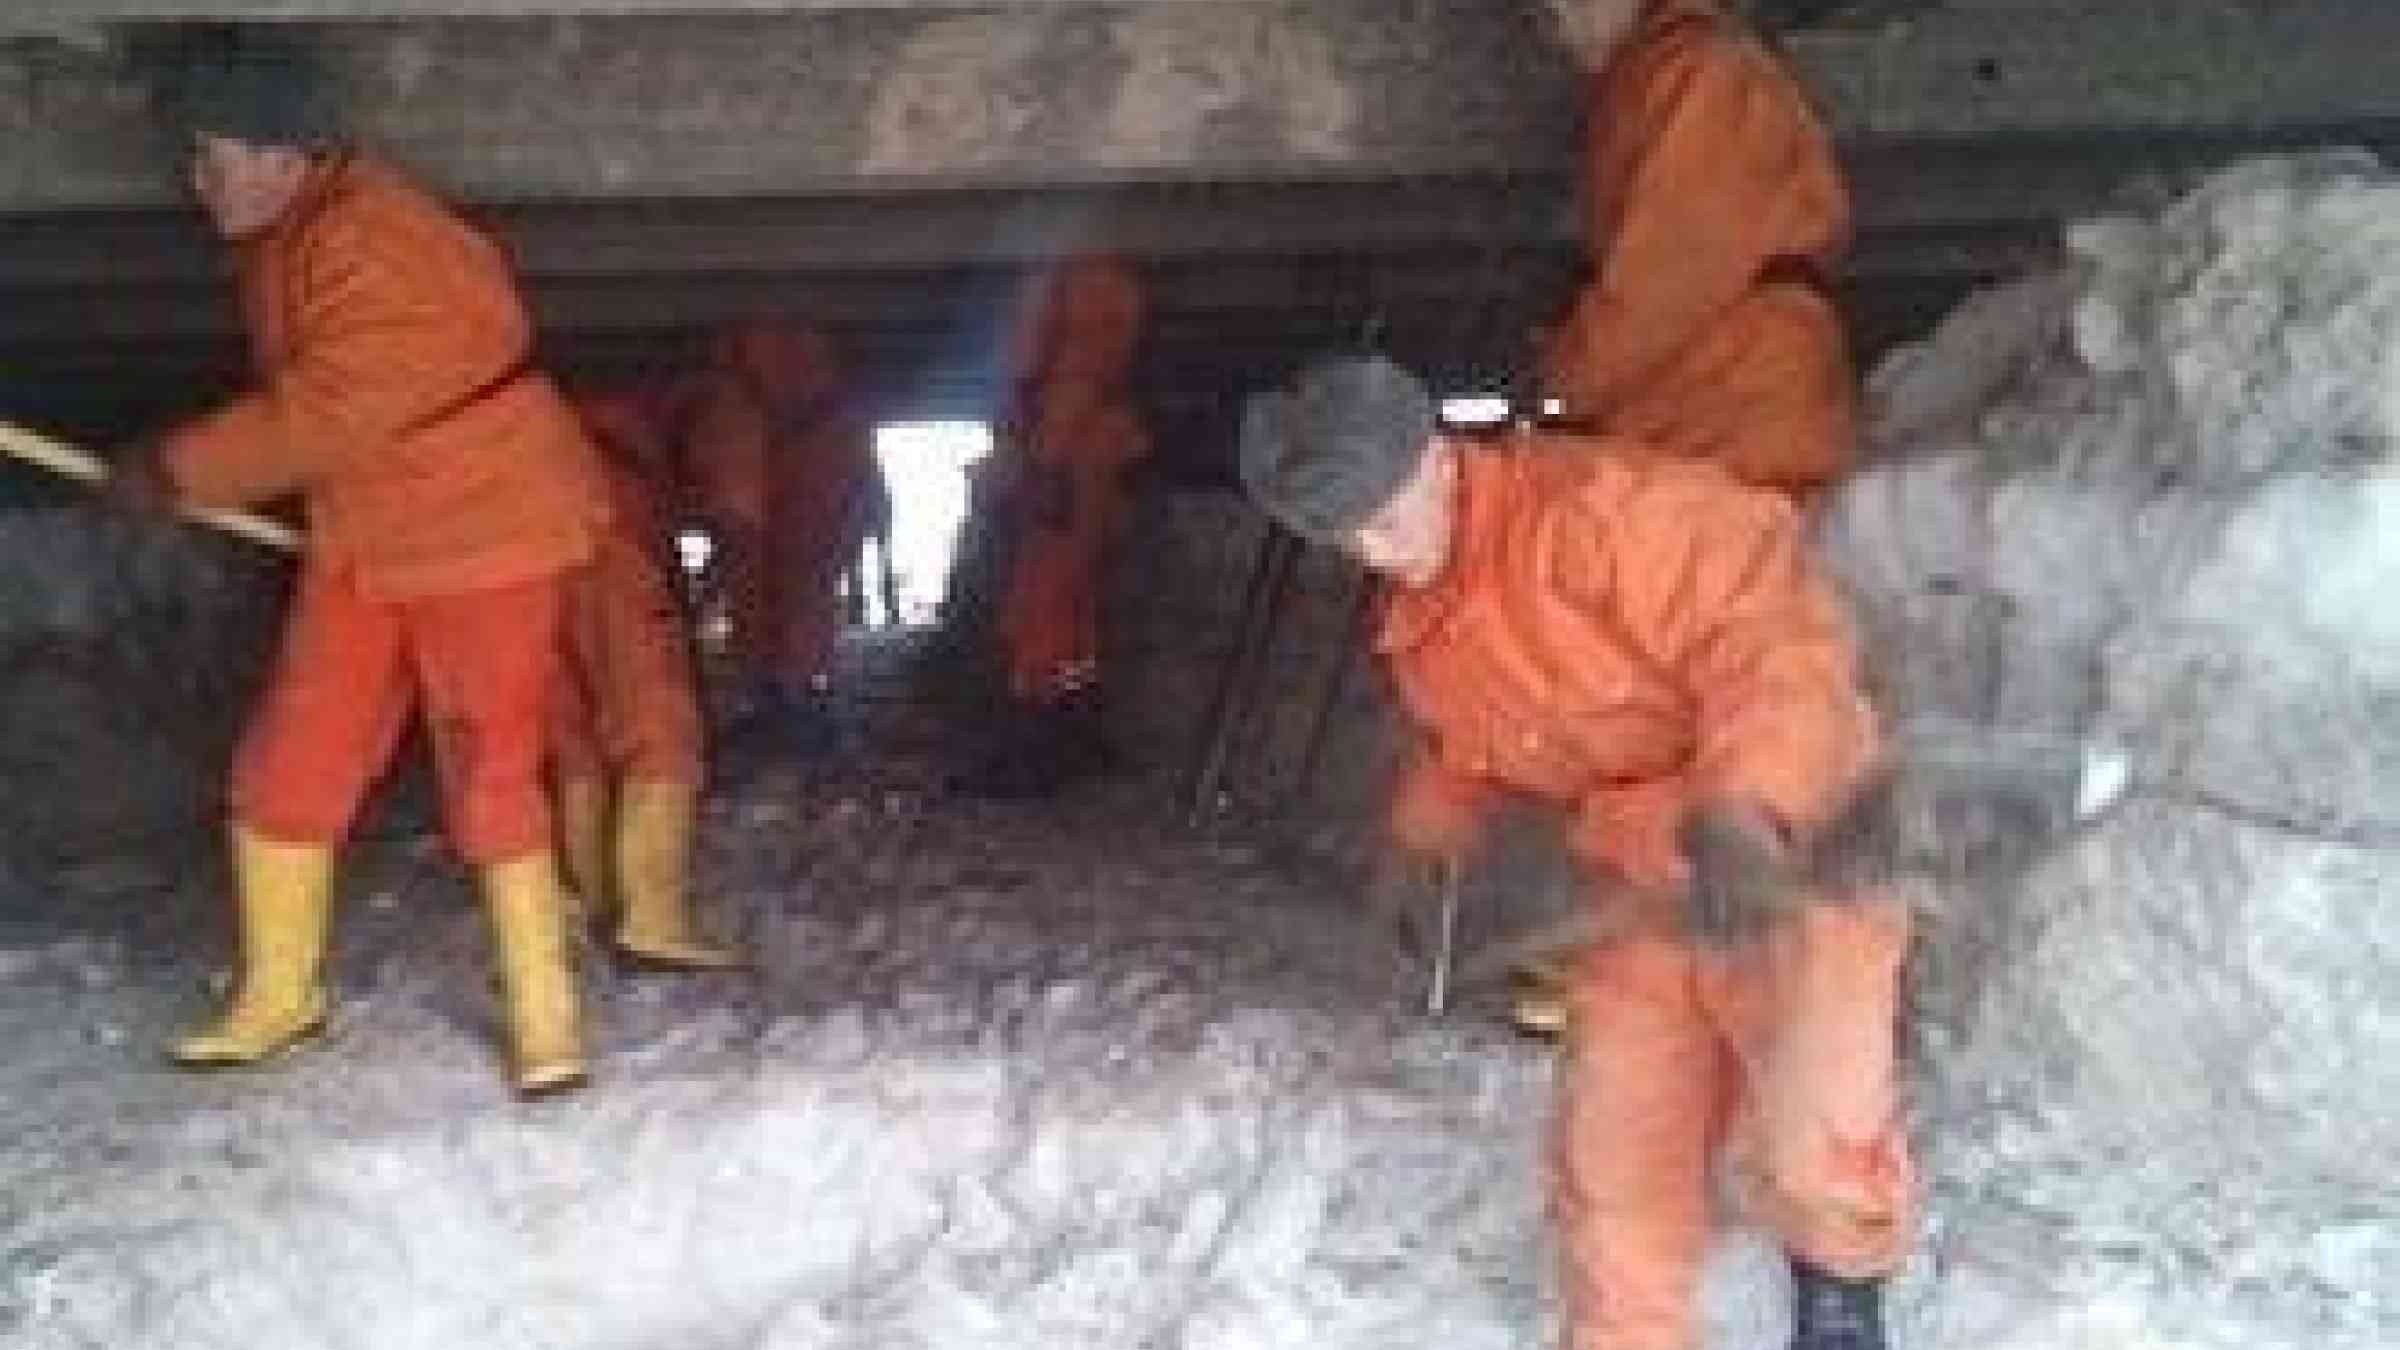 This winter, emergency workers moblilized to clear ice blocking a river bridge in Bishkek, reducing the risk of flooding (Photo: Ministry of Emergency Situations of Kyrgyzstan)